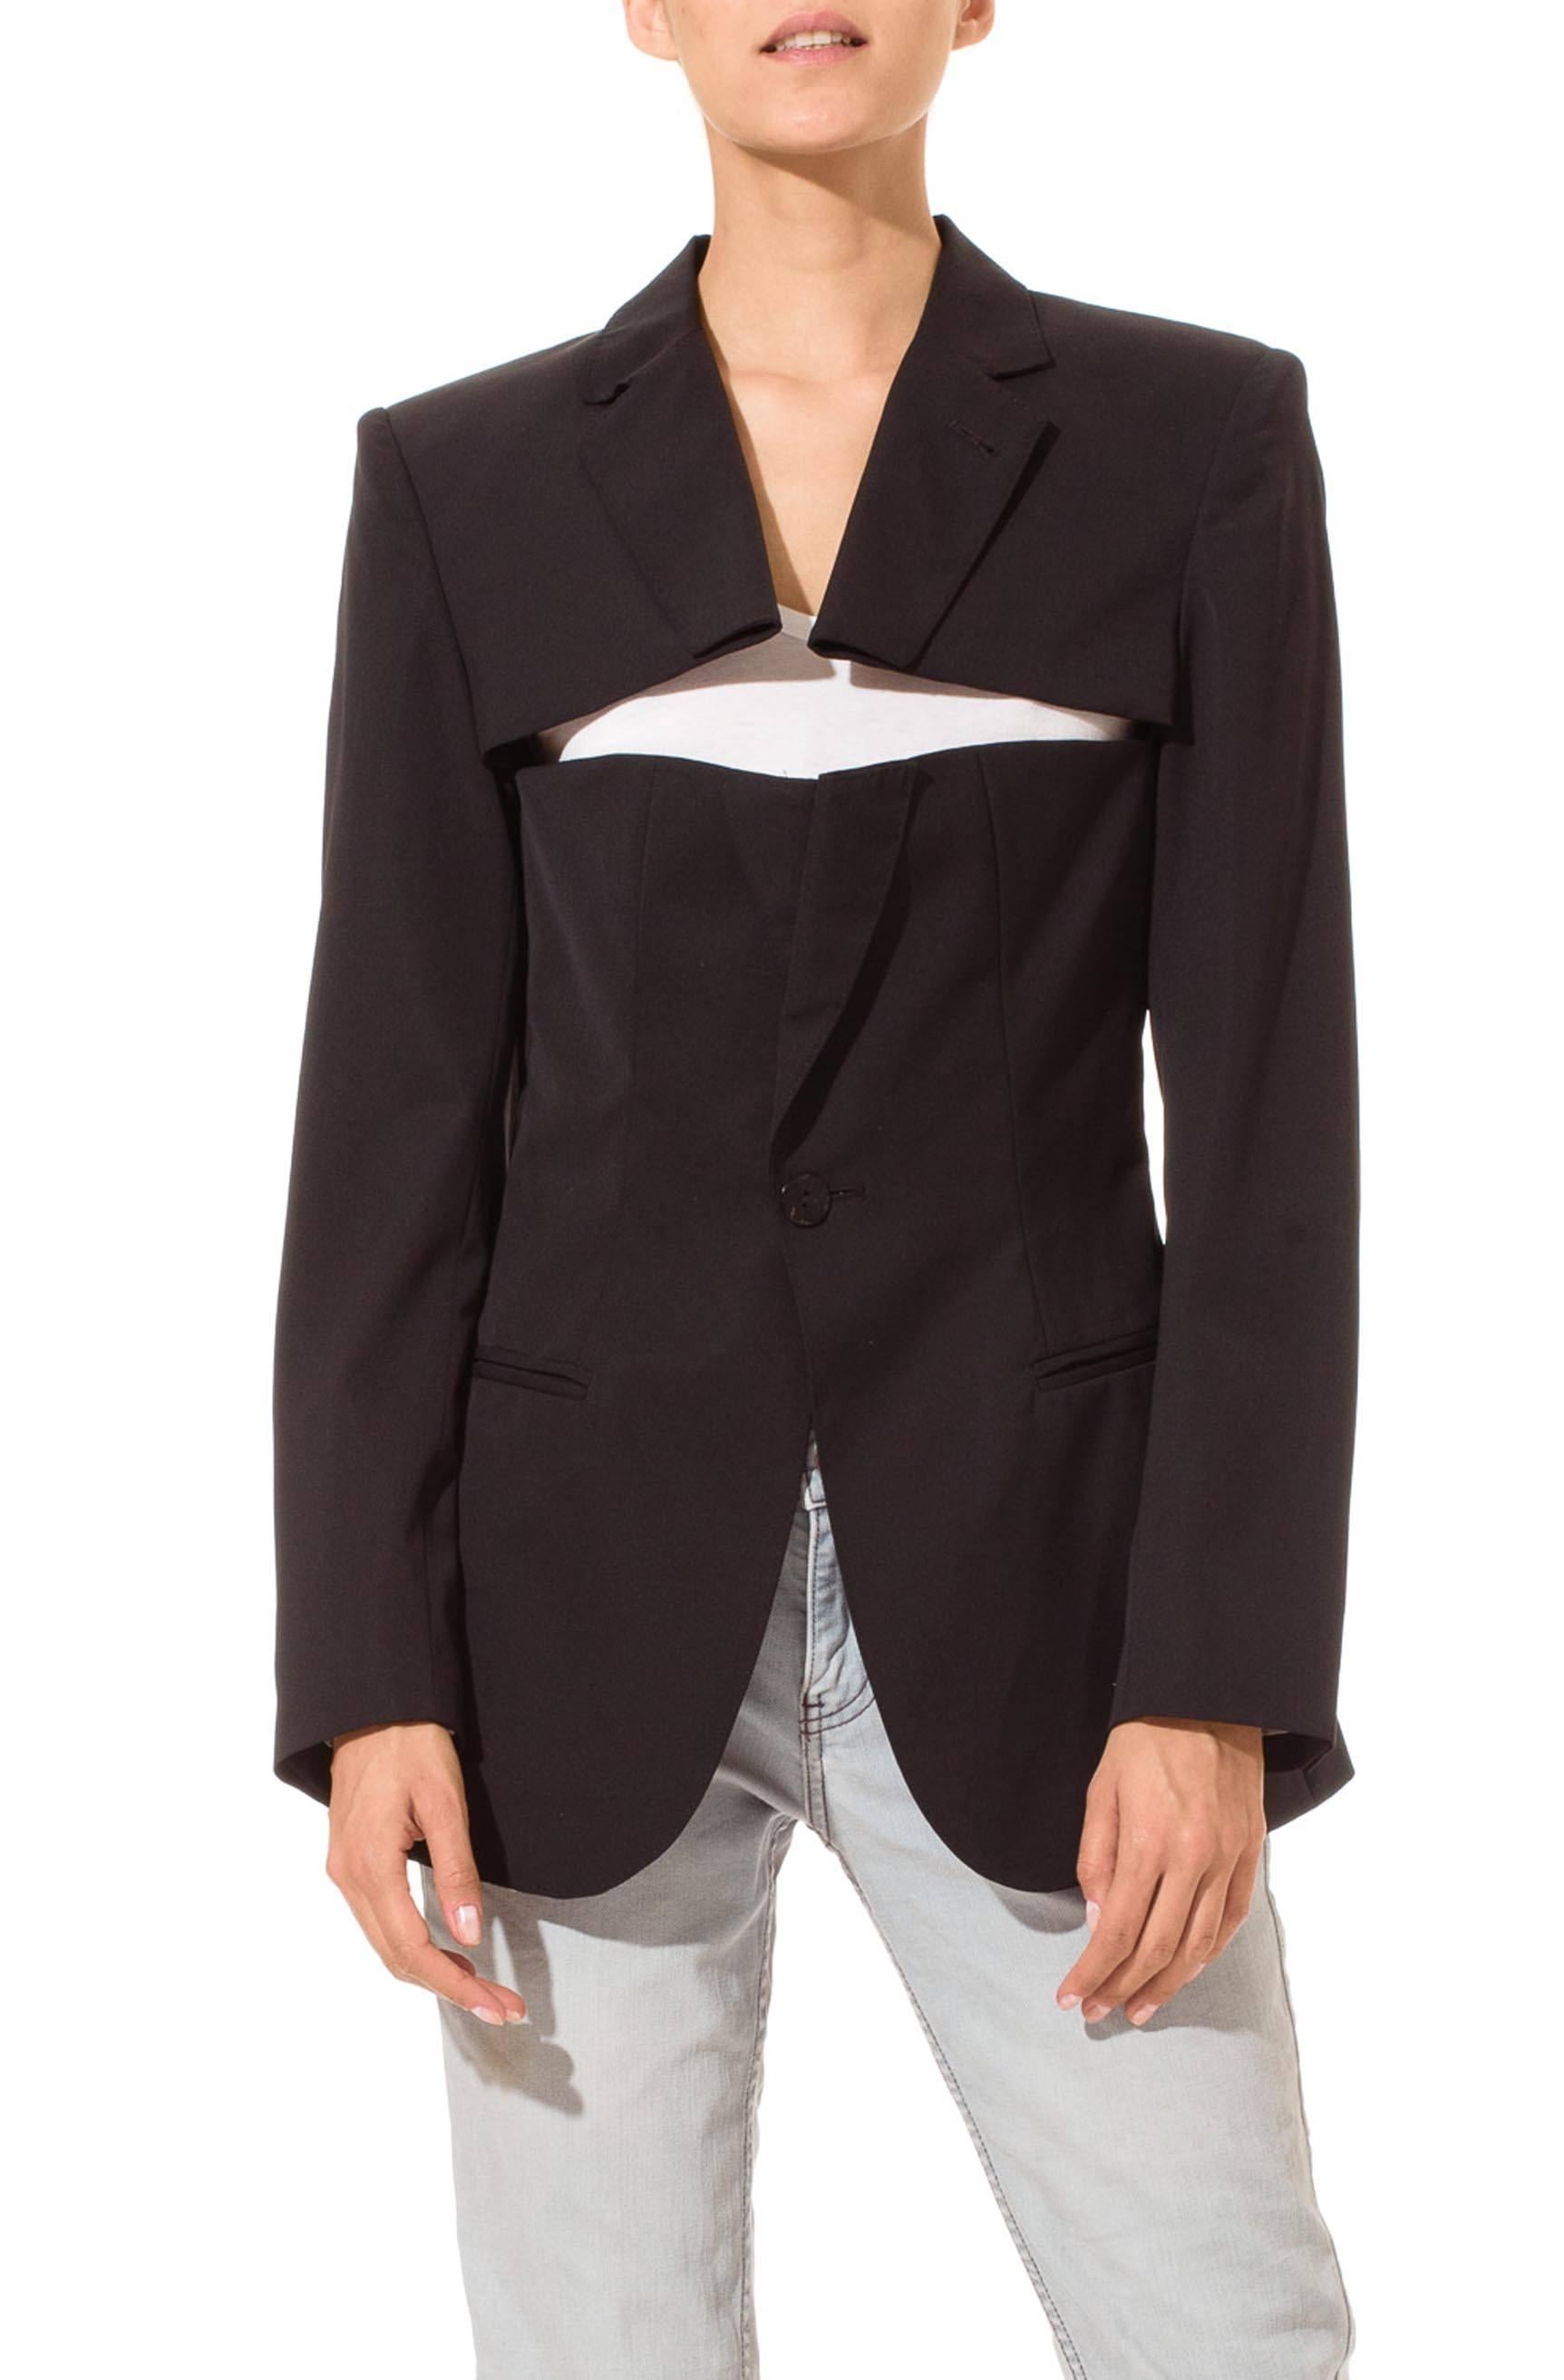 This is a blazer from Jean Paul Gaultier’s famous line of bustier- and corset-inspired blazers. Brilliantly designed and ingeniously constructed, this jacket is made to look as if a suit jacket has been slashed open above the bust to become a